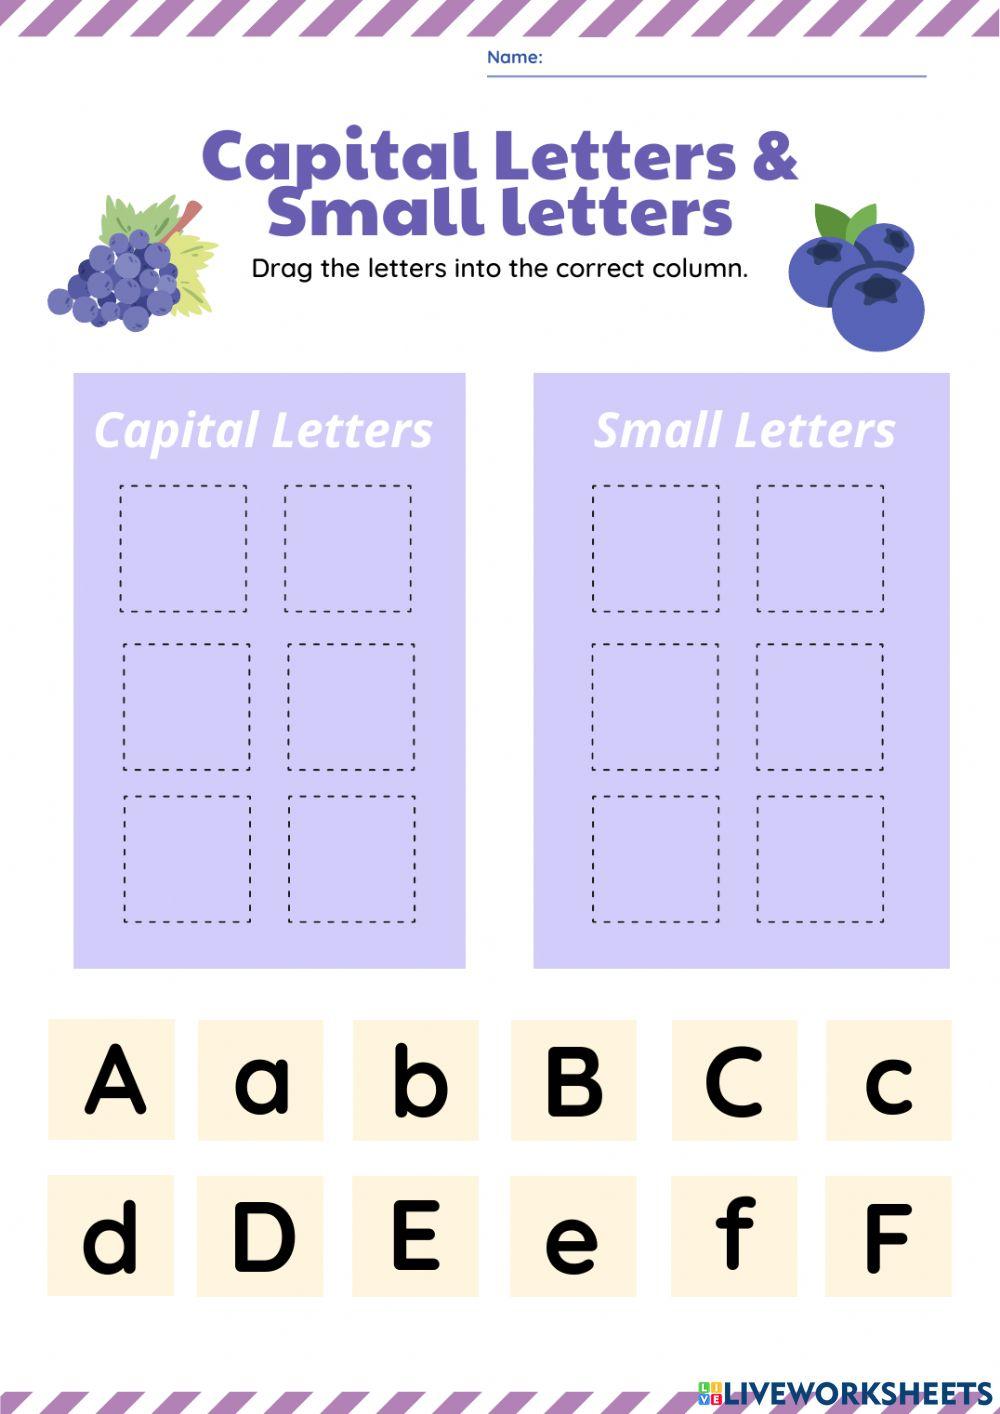 Capital Letters and Small Letters